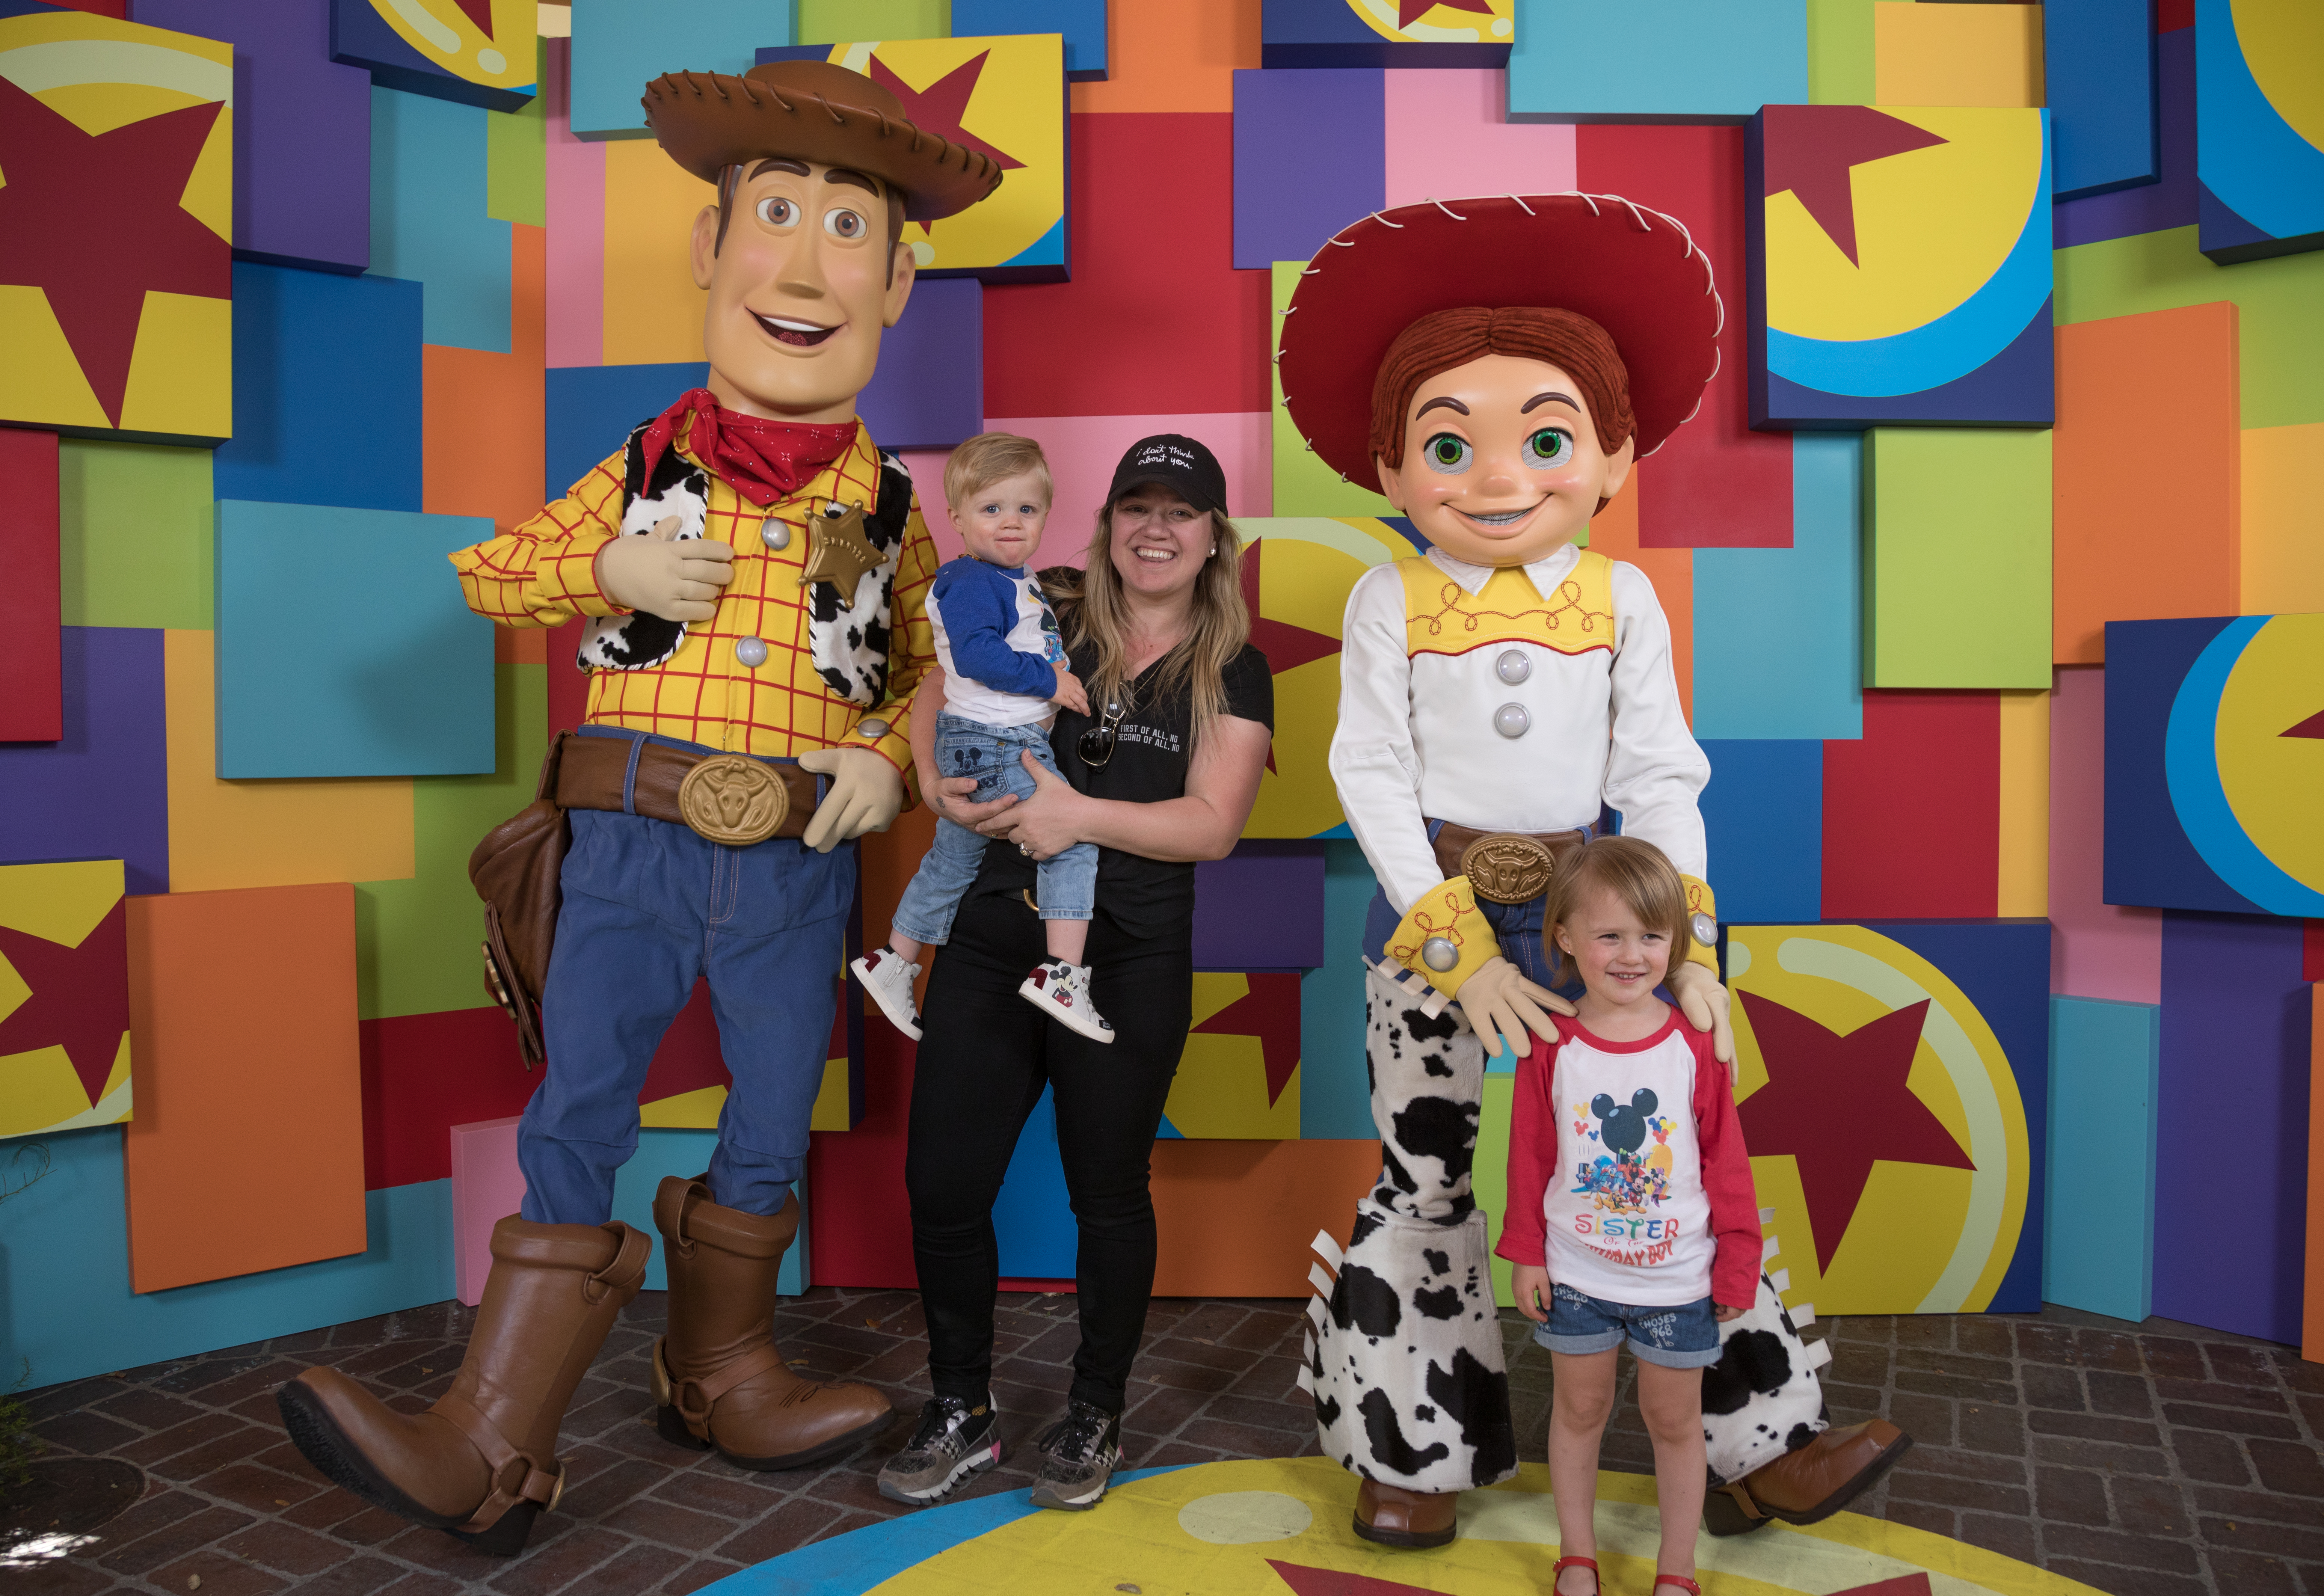 Kelly Clarkson and her children, Remington Alexander and River Rose, visit with Woody and Jessie at the launch of Pixar Fest at the Disneyland Resort in Anaheim, California, on April 12, 2018 | Source: Getty Images